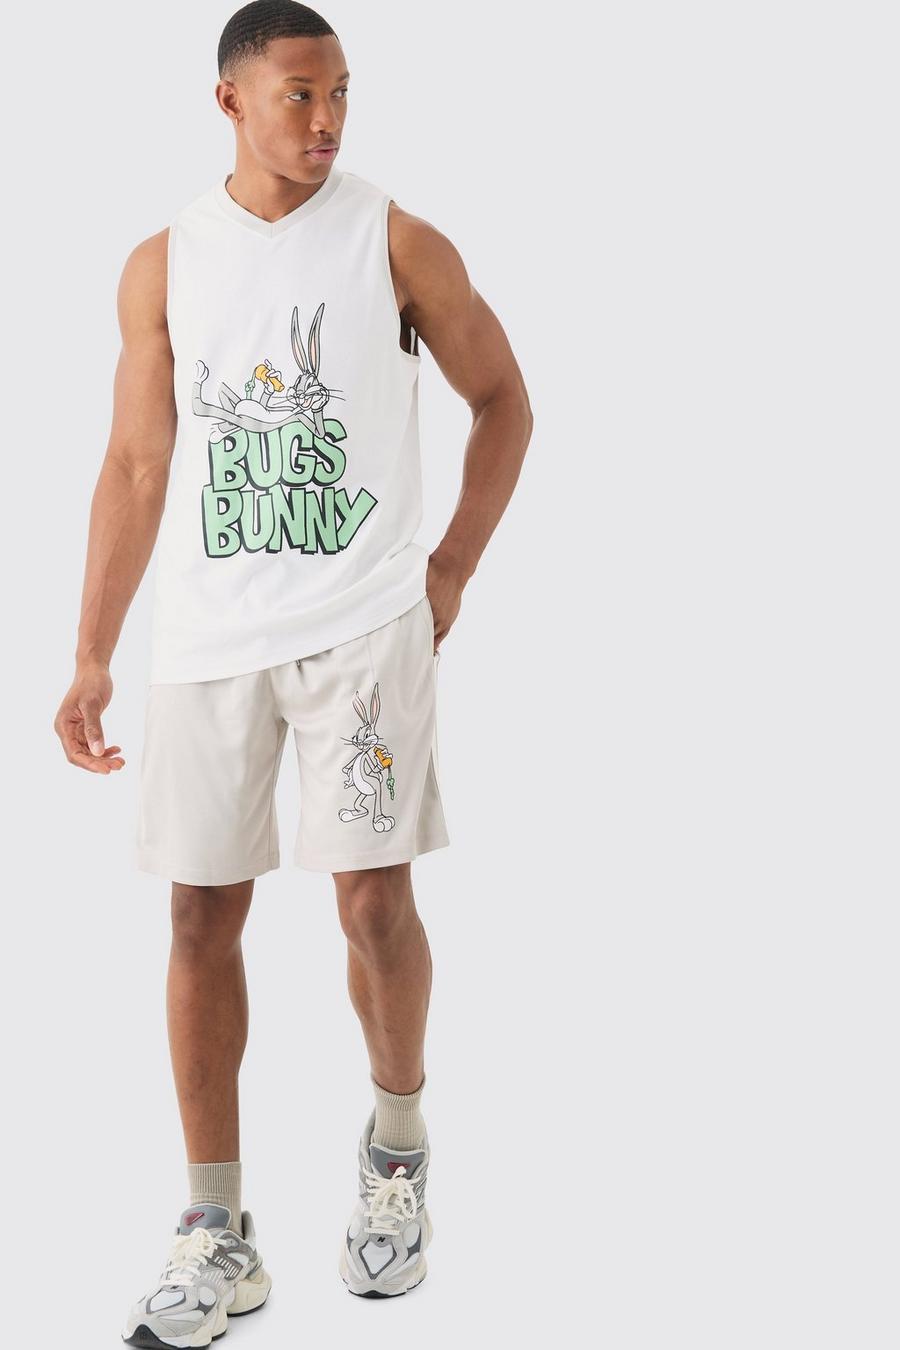 Grey Oversized Bugs Bunny Looney Tunes License Mesh Vest And Short Set